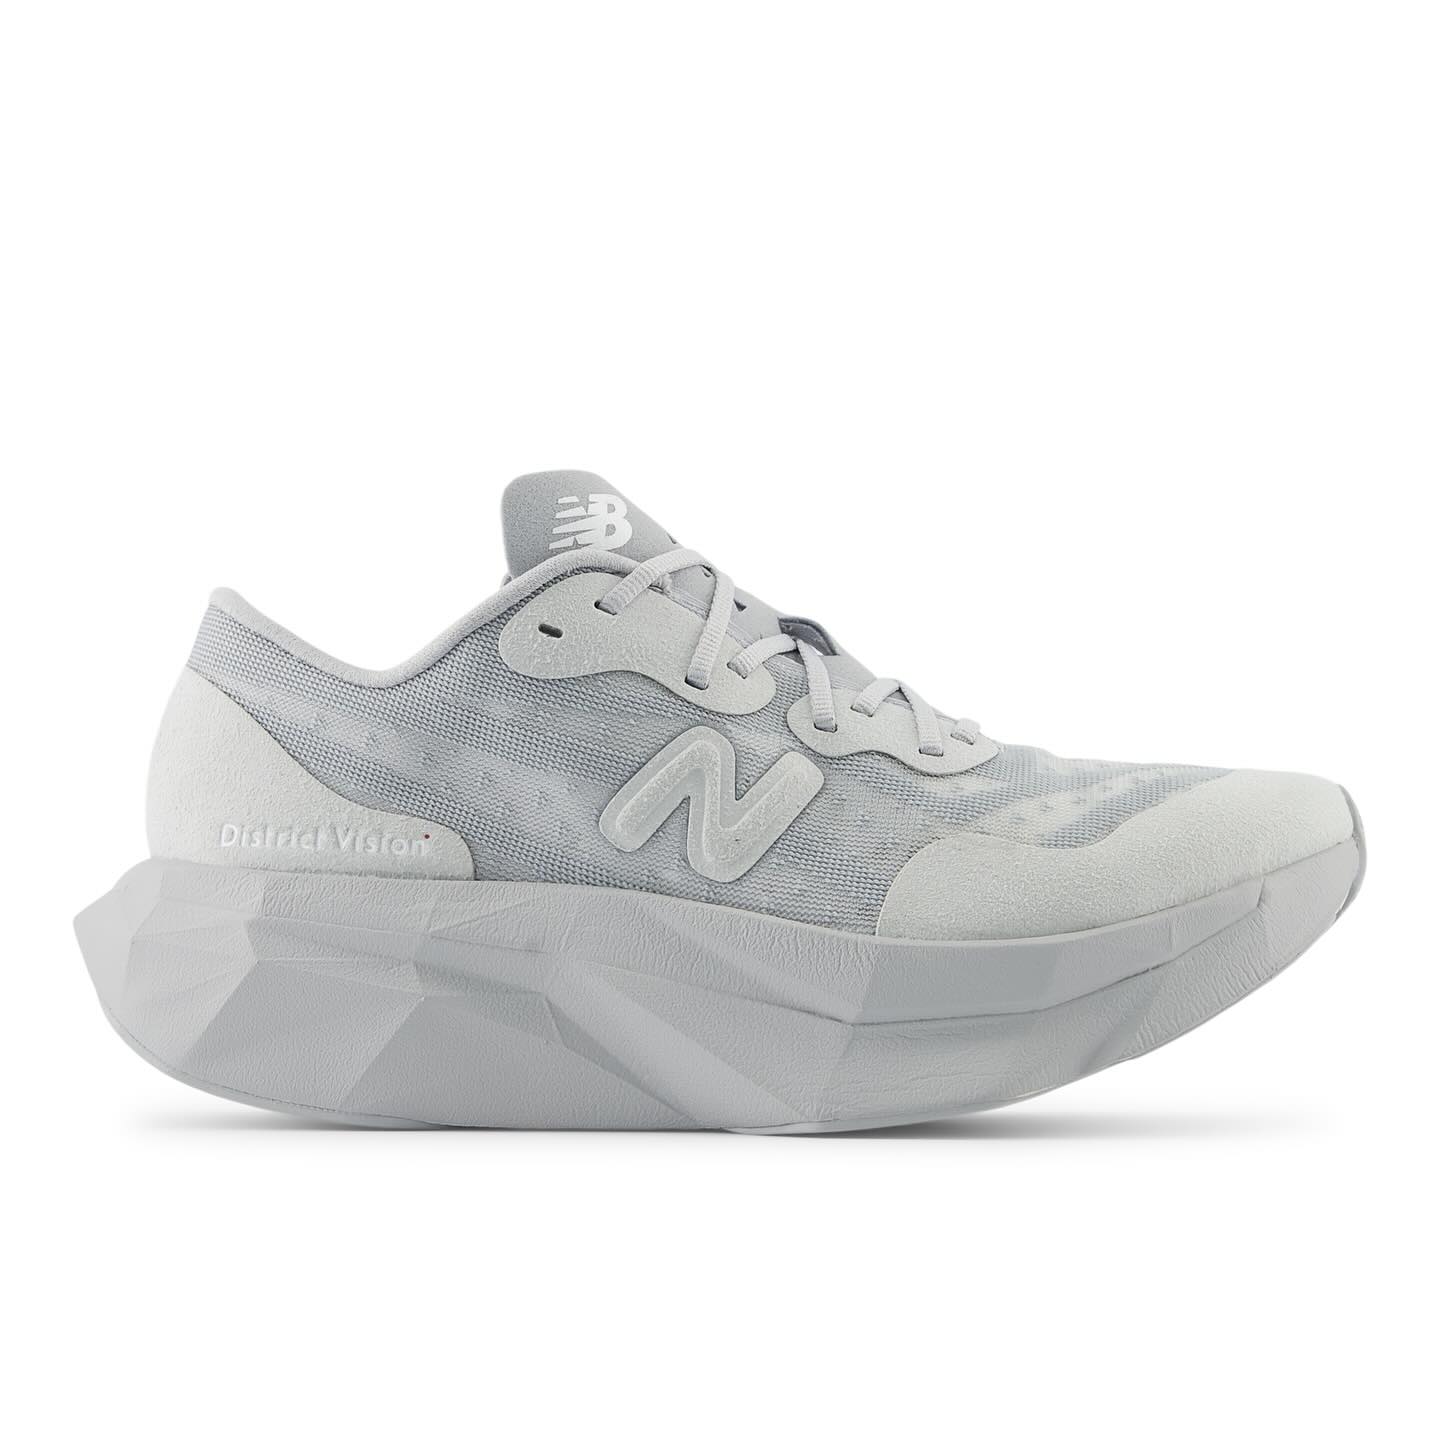 district vision new balance superchamp grey day sneakers